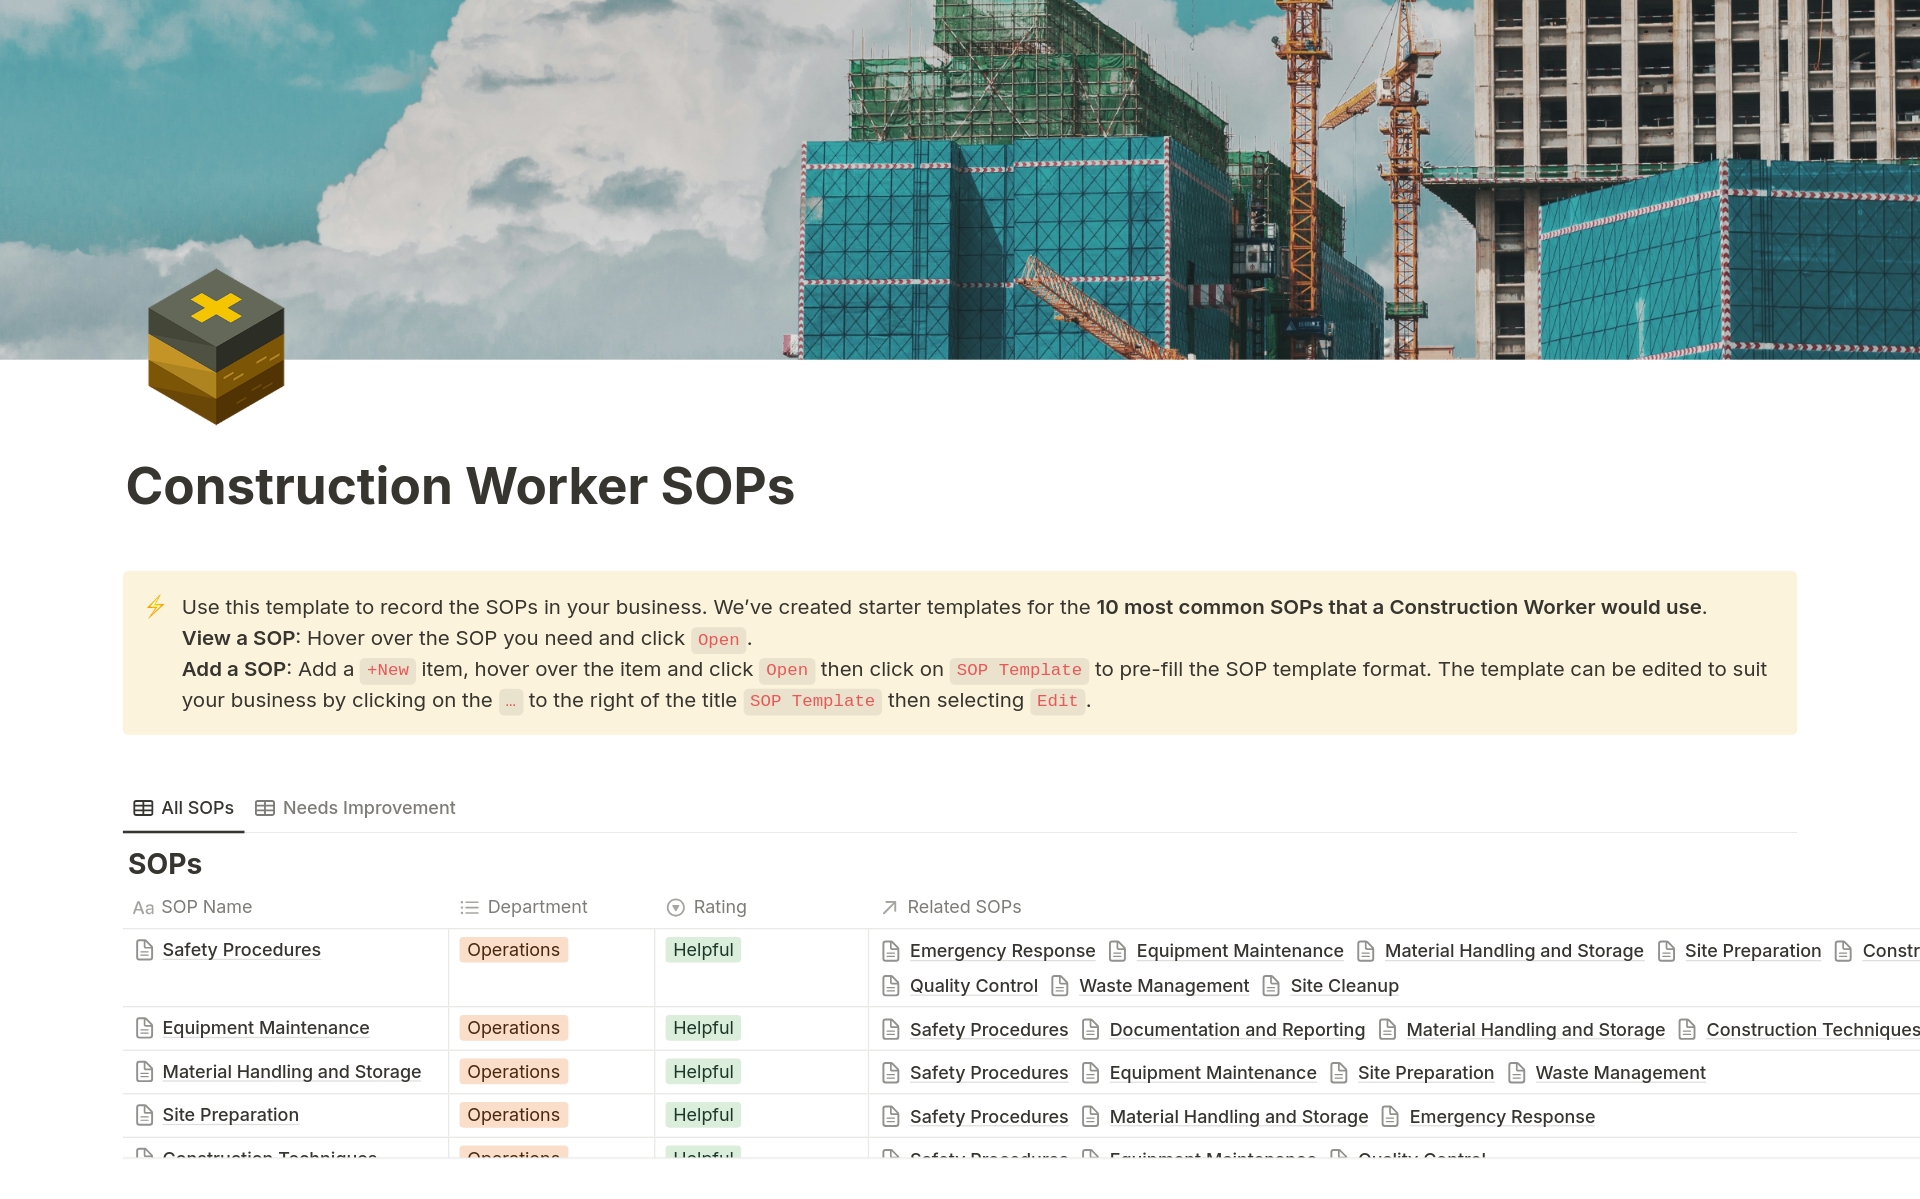 This template outlines standard operating procedures (SOPs) for construction workers, emphasizing safety, efficiency, and quality control. save 10 hours of research.